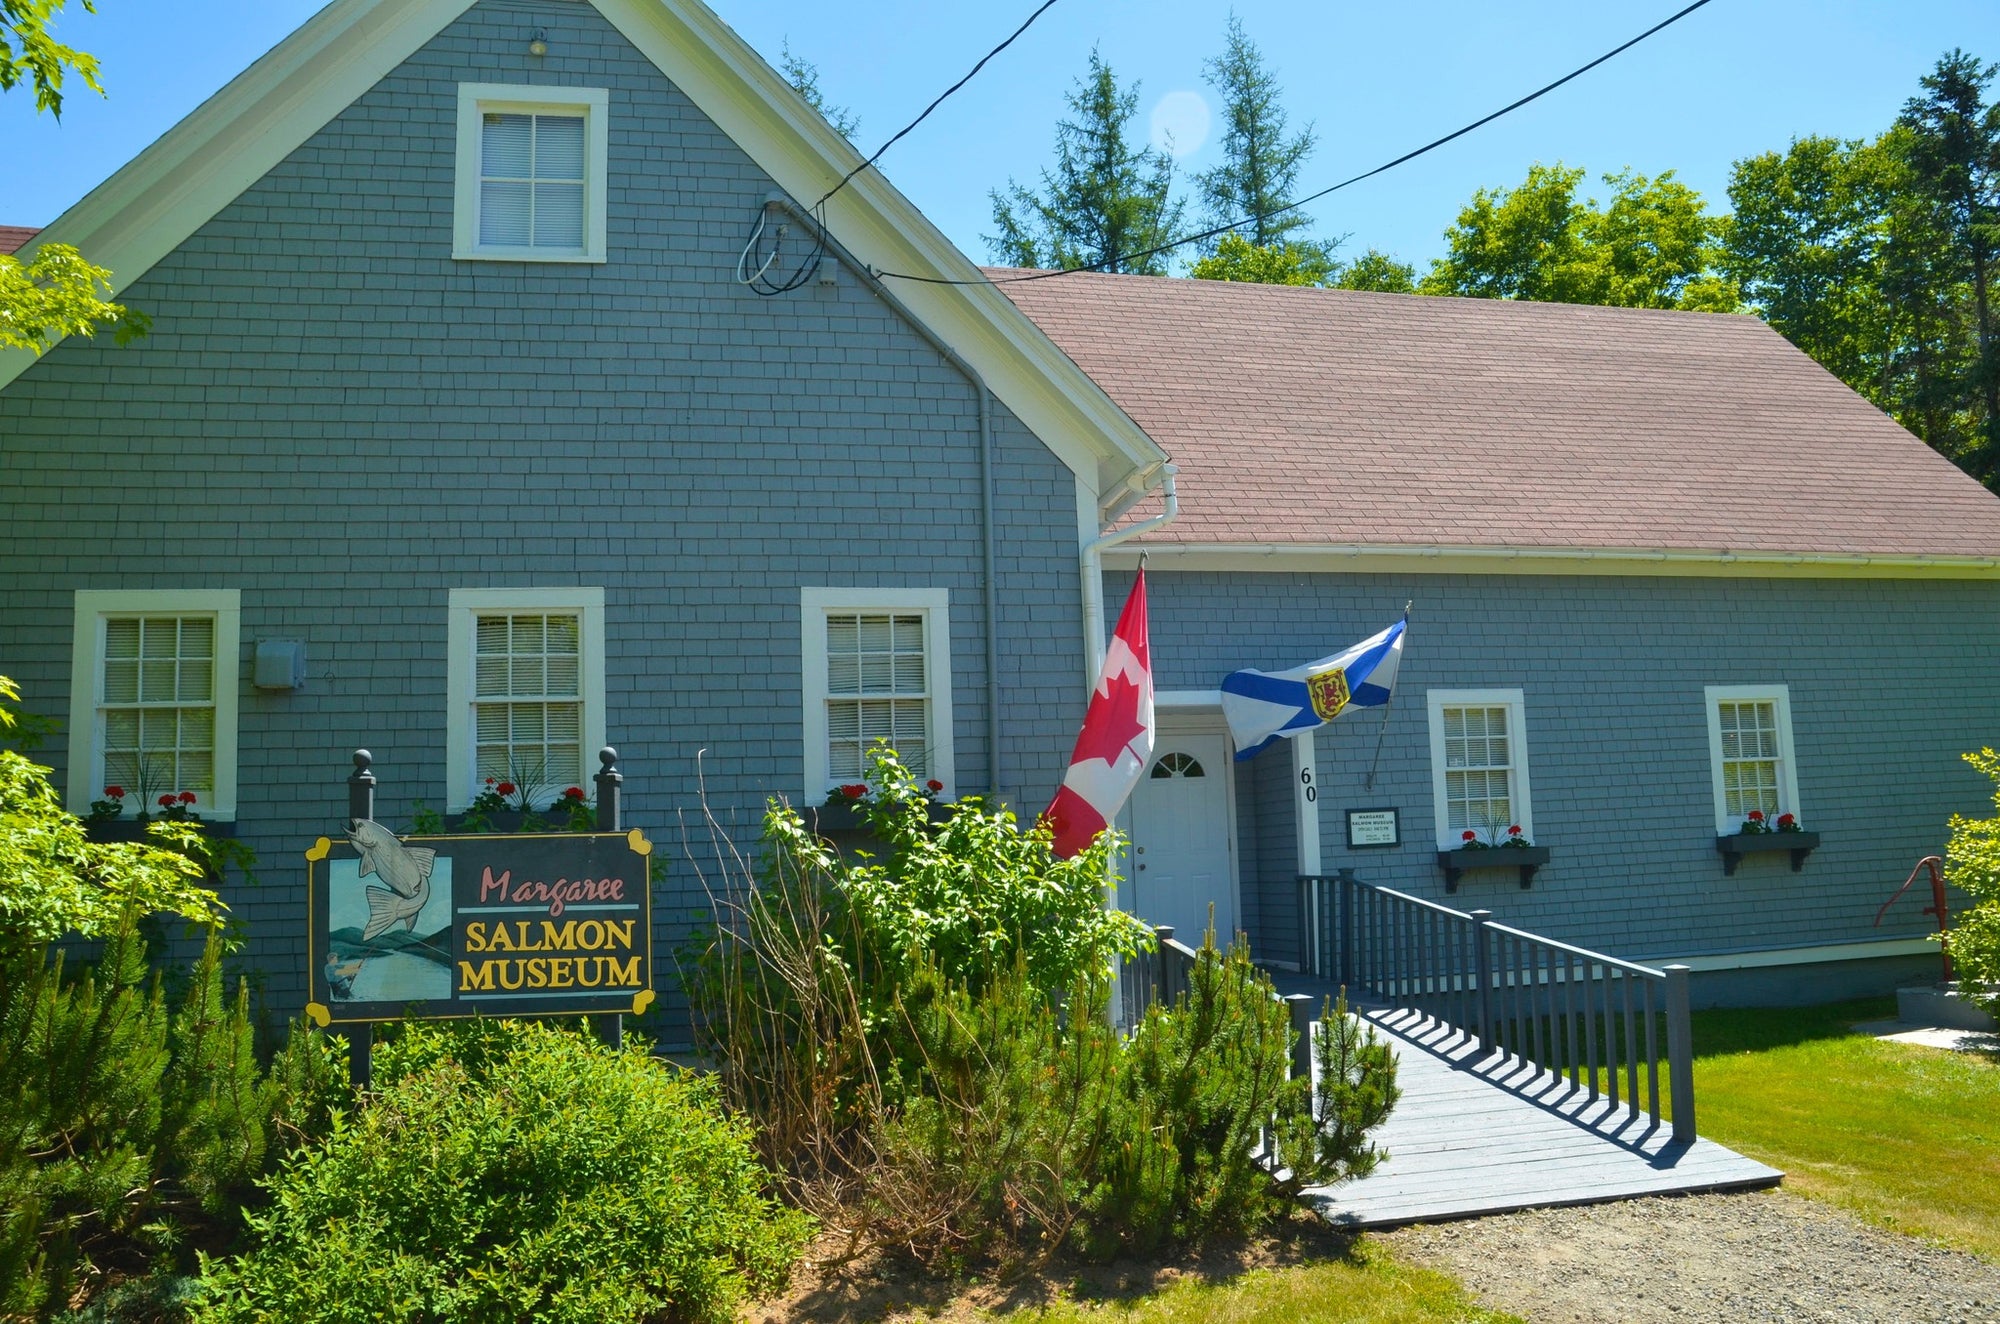 Trip Reports: The Margaree Salmon Museum